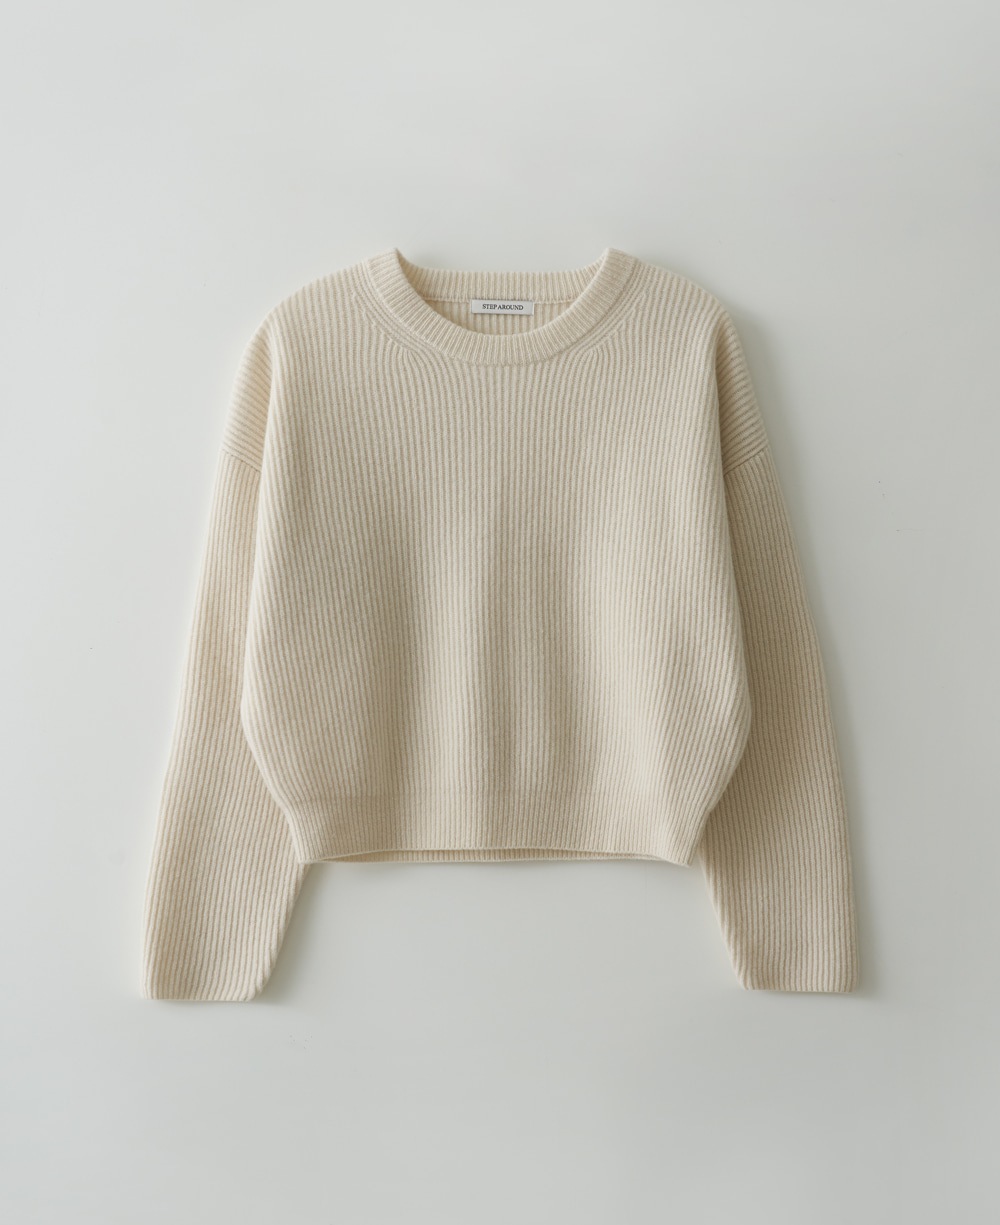 FW 22 Series line - Cashmere drop round knit (IVORY)